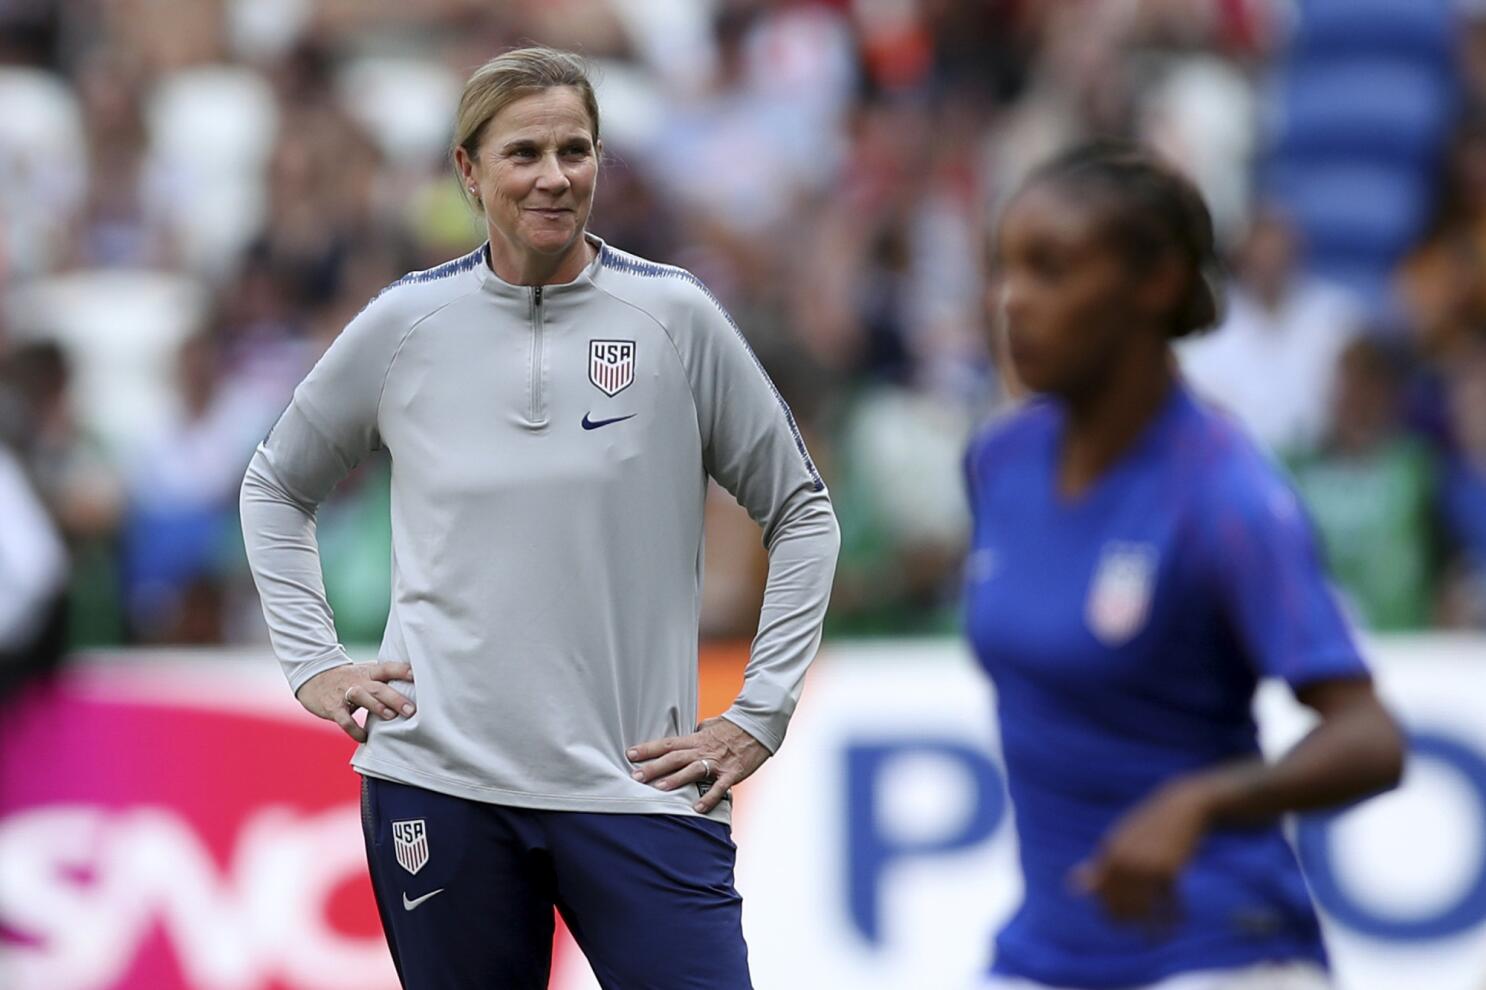 U.S. Women's team's new uniforms revealed ahead of this summer's